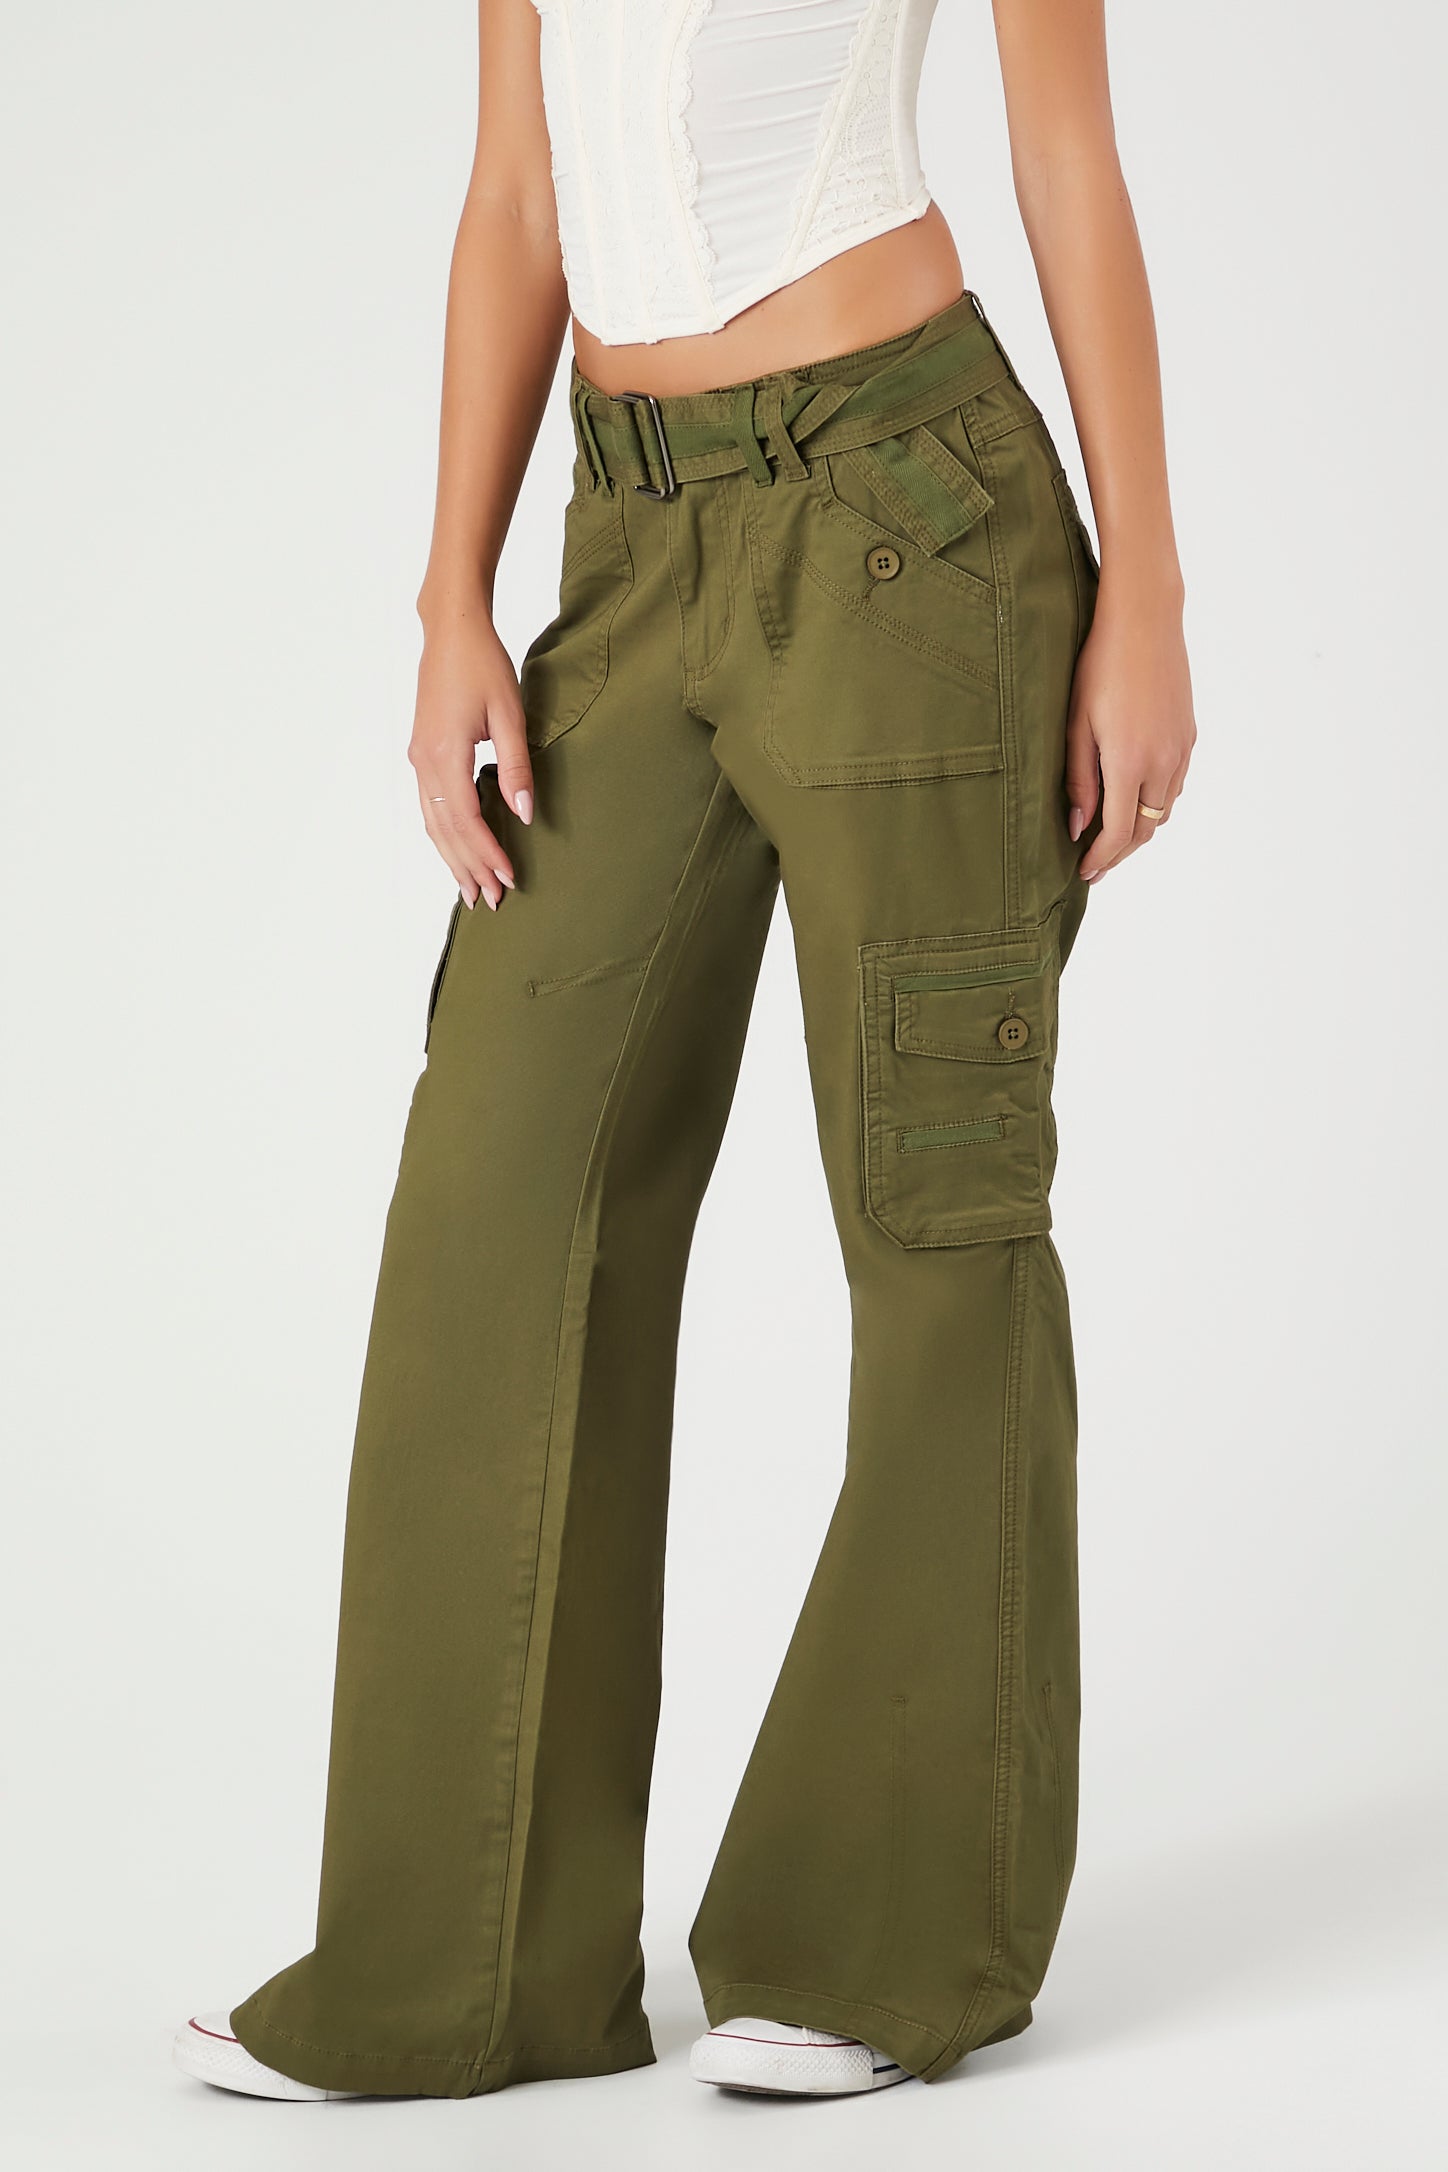 Plus Size - A-Line Flare Lightweight Twill Cargo High Rise Pant